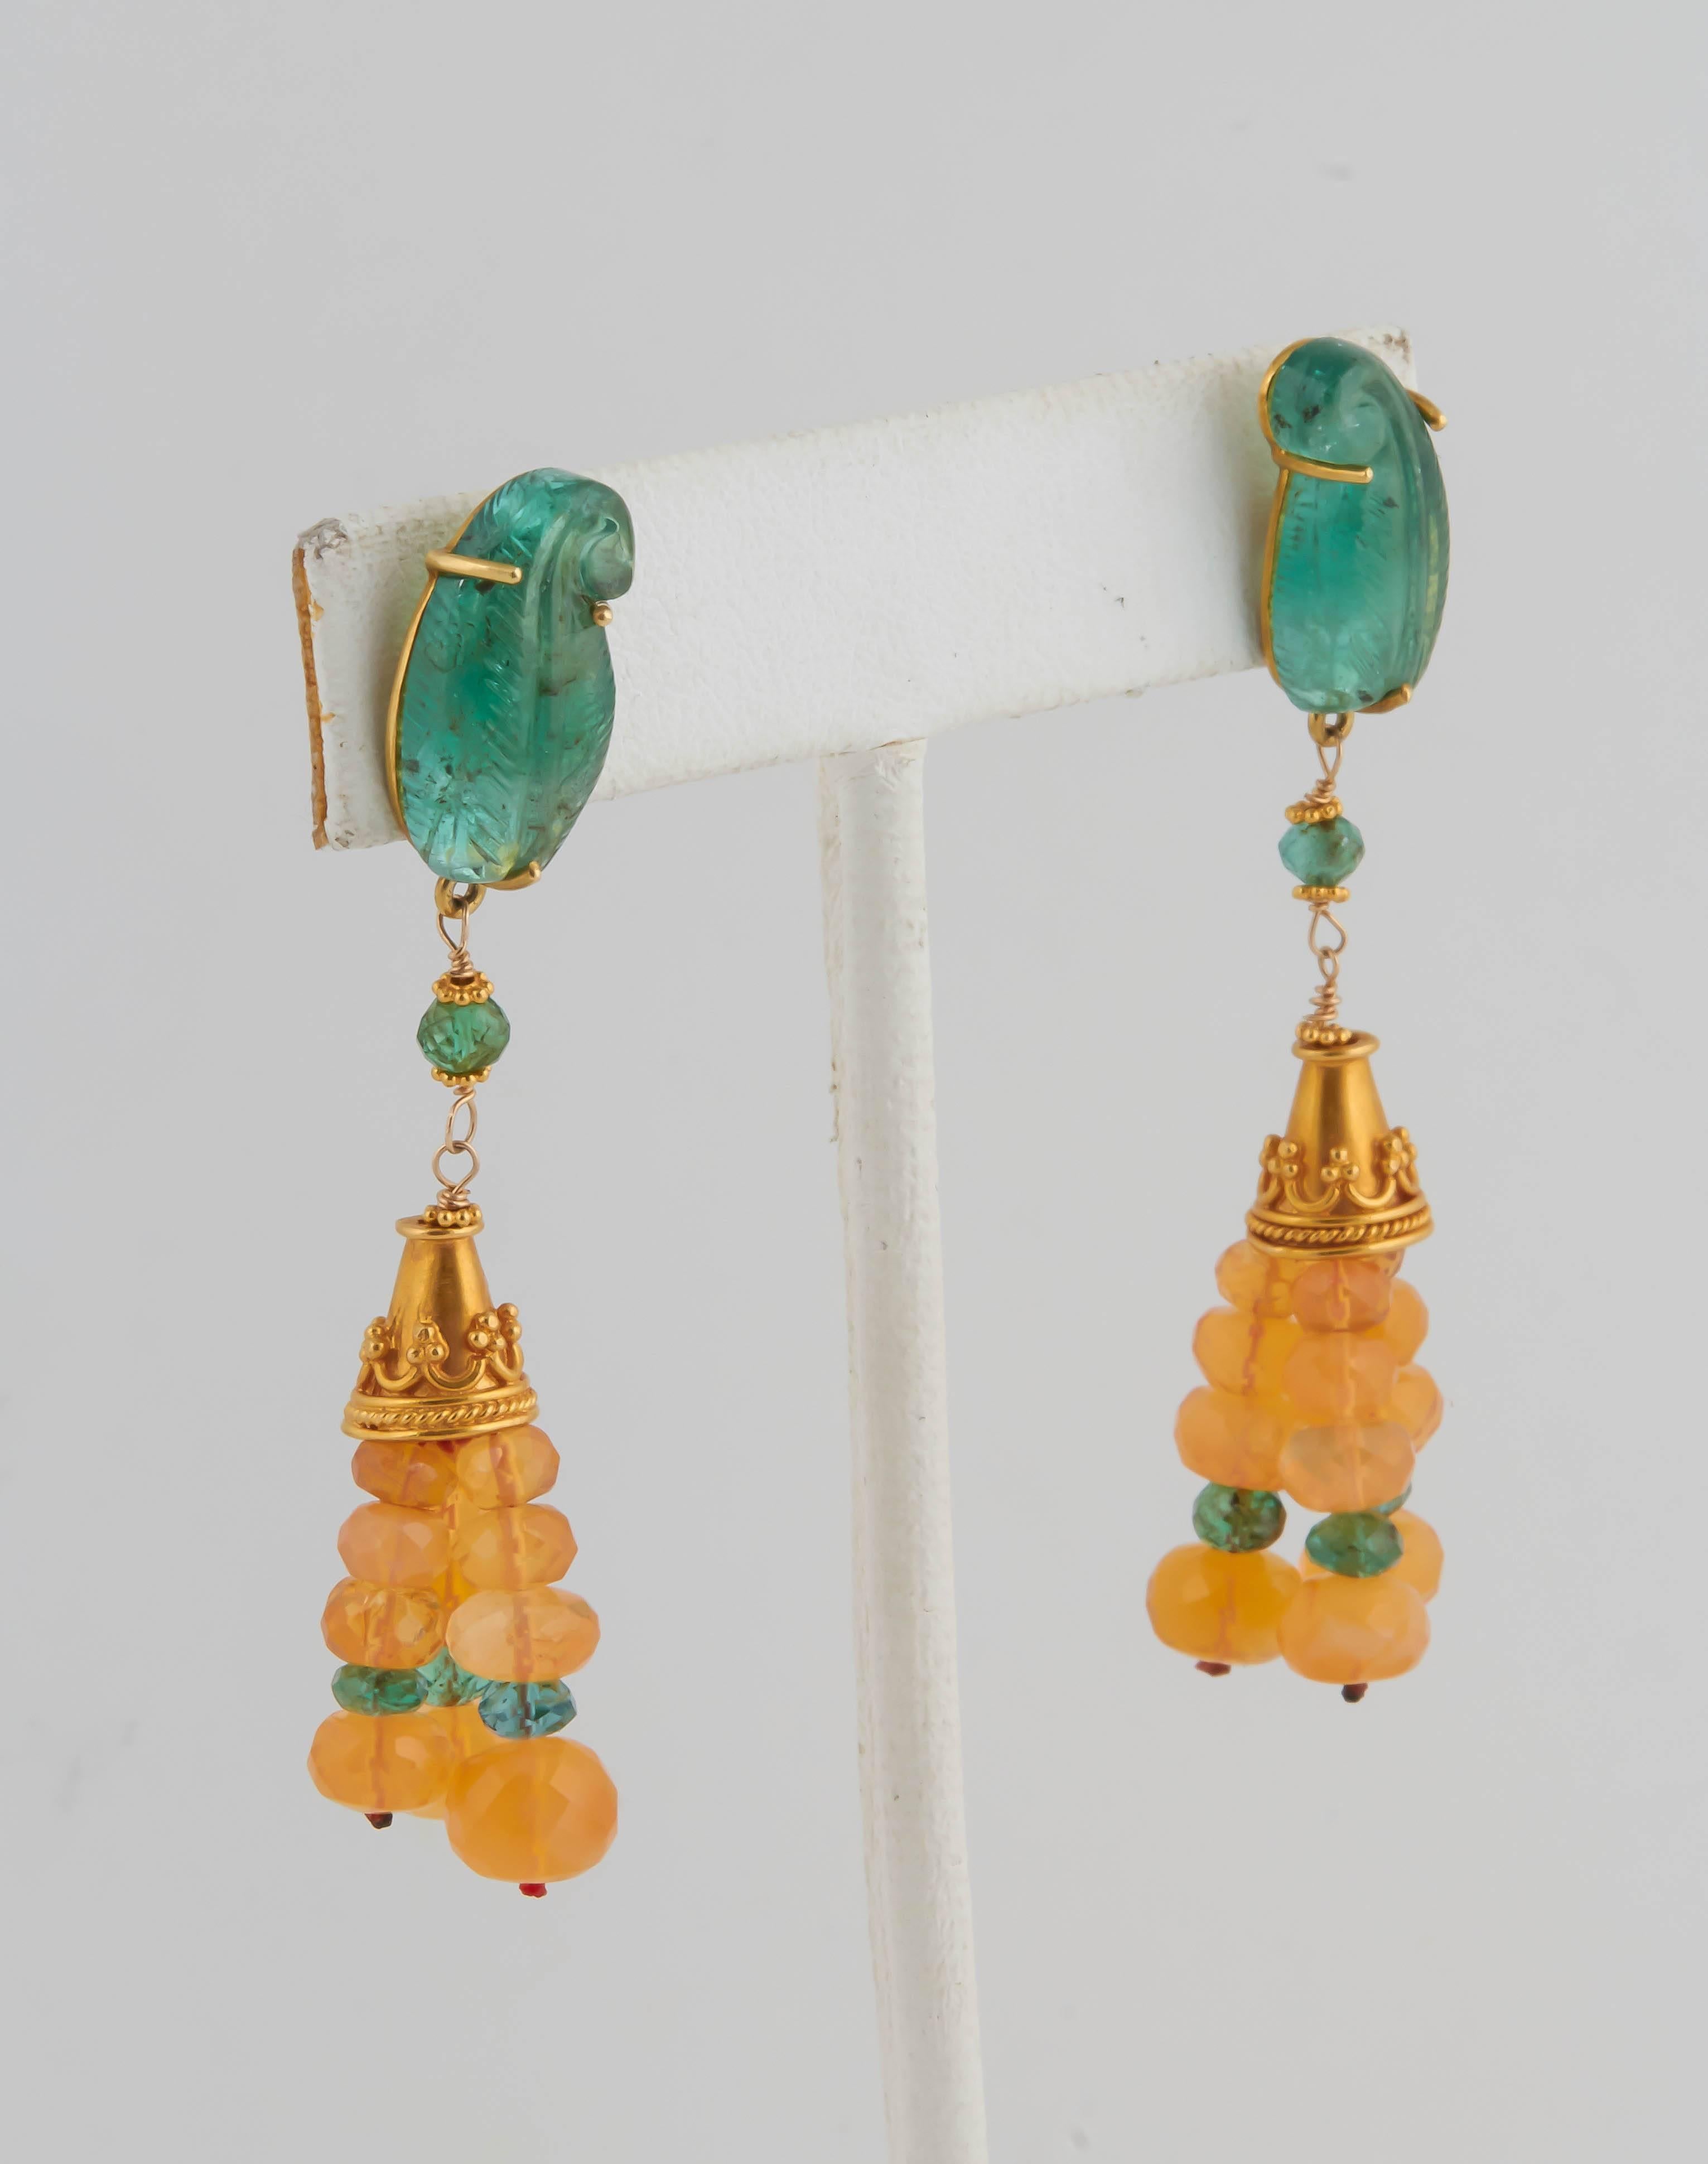 Truly an amazing combination of colored stone beads! All the spacers are 18 kt gold in the earrings and the necklace. The fire opal beads are a clear and striking orange color, a perfect foil for the rich green emerald beads.The emerald leaves on